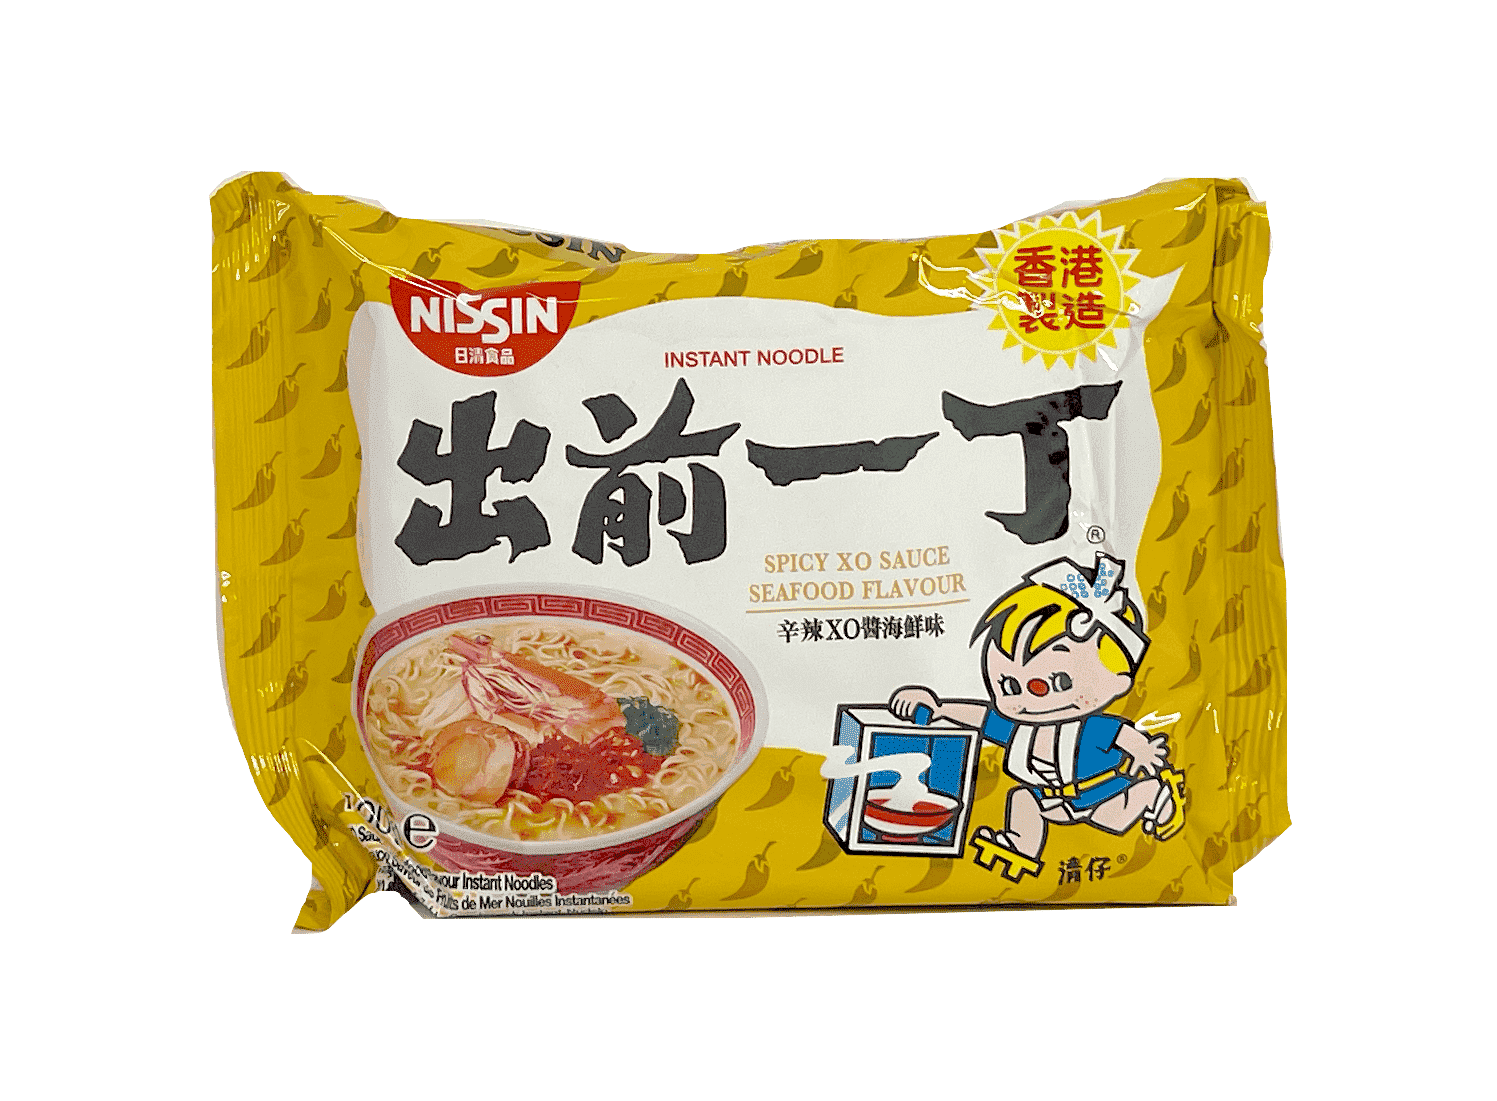 Instant Noodles Ramen With Spicy XO Sauce Flavour 100g Nissin Hong Kong